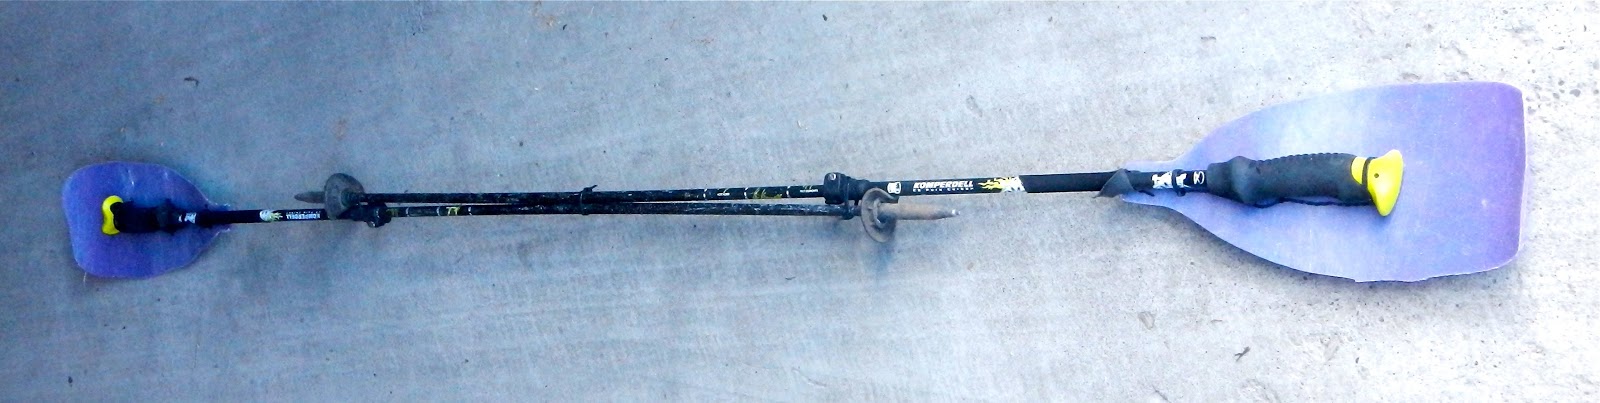 exped trekking pole